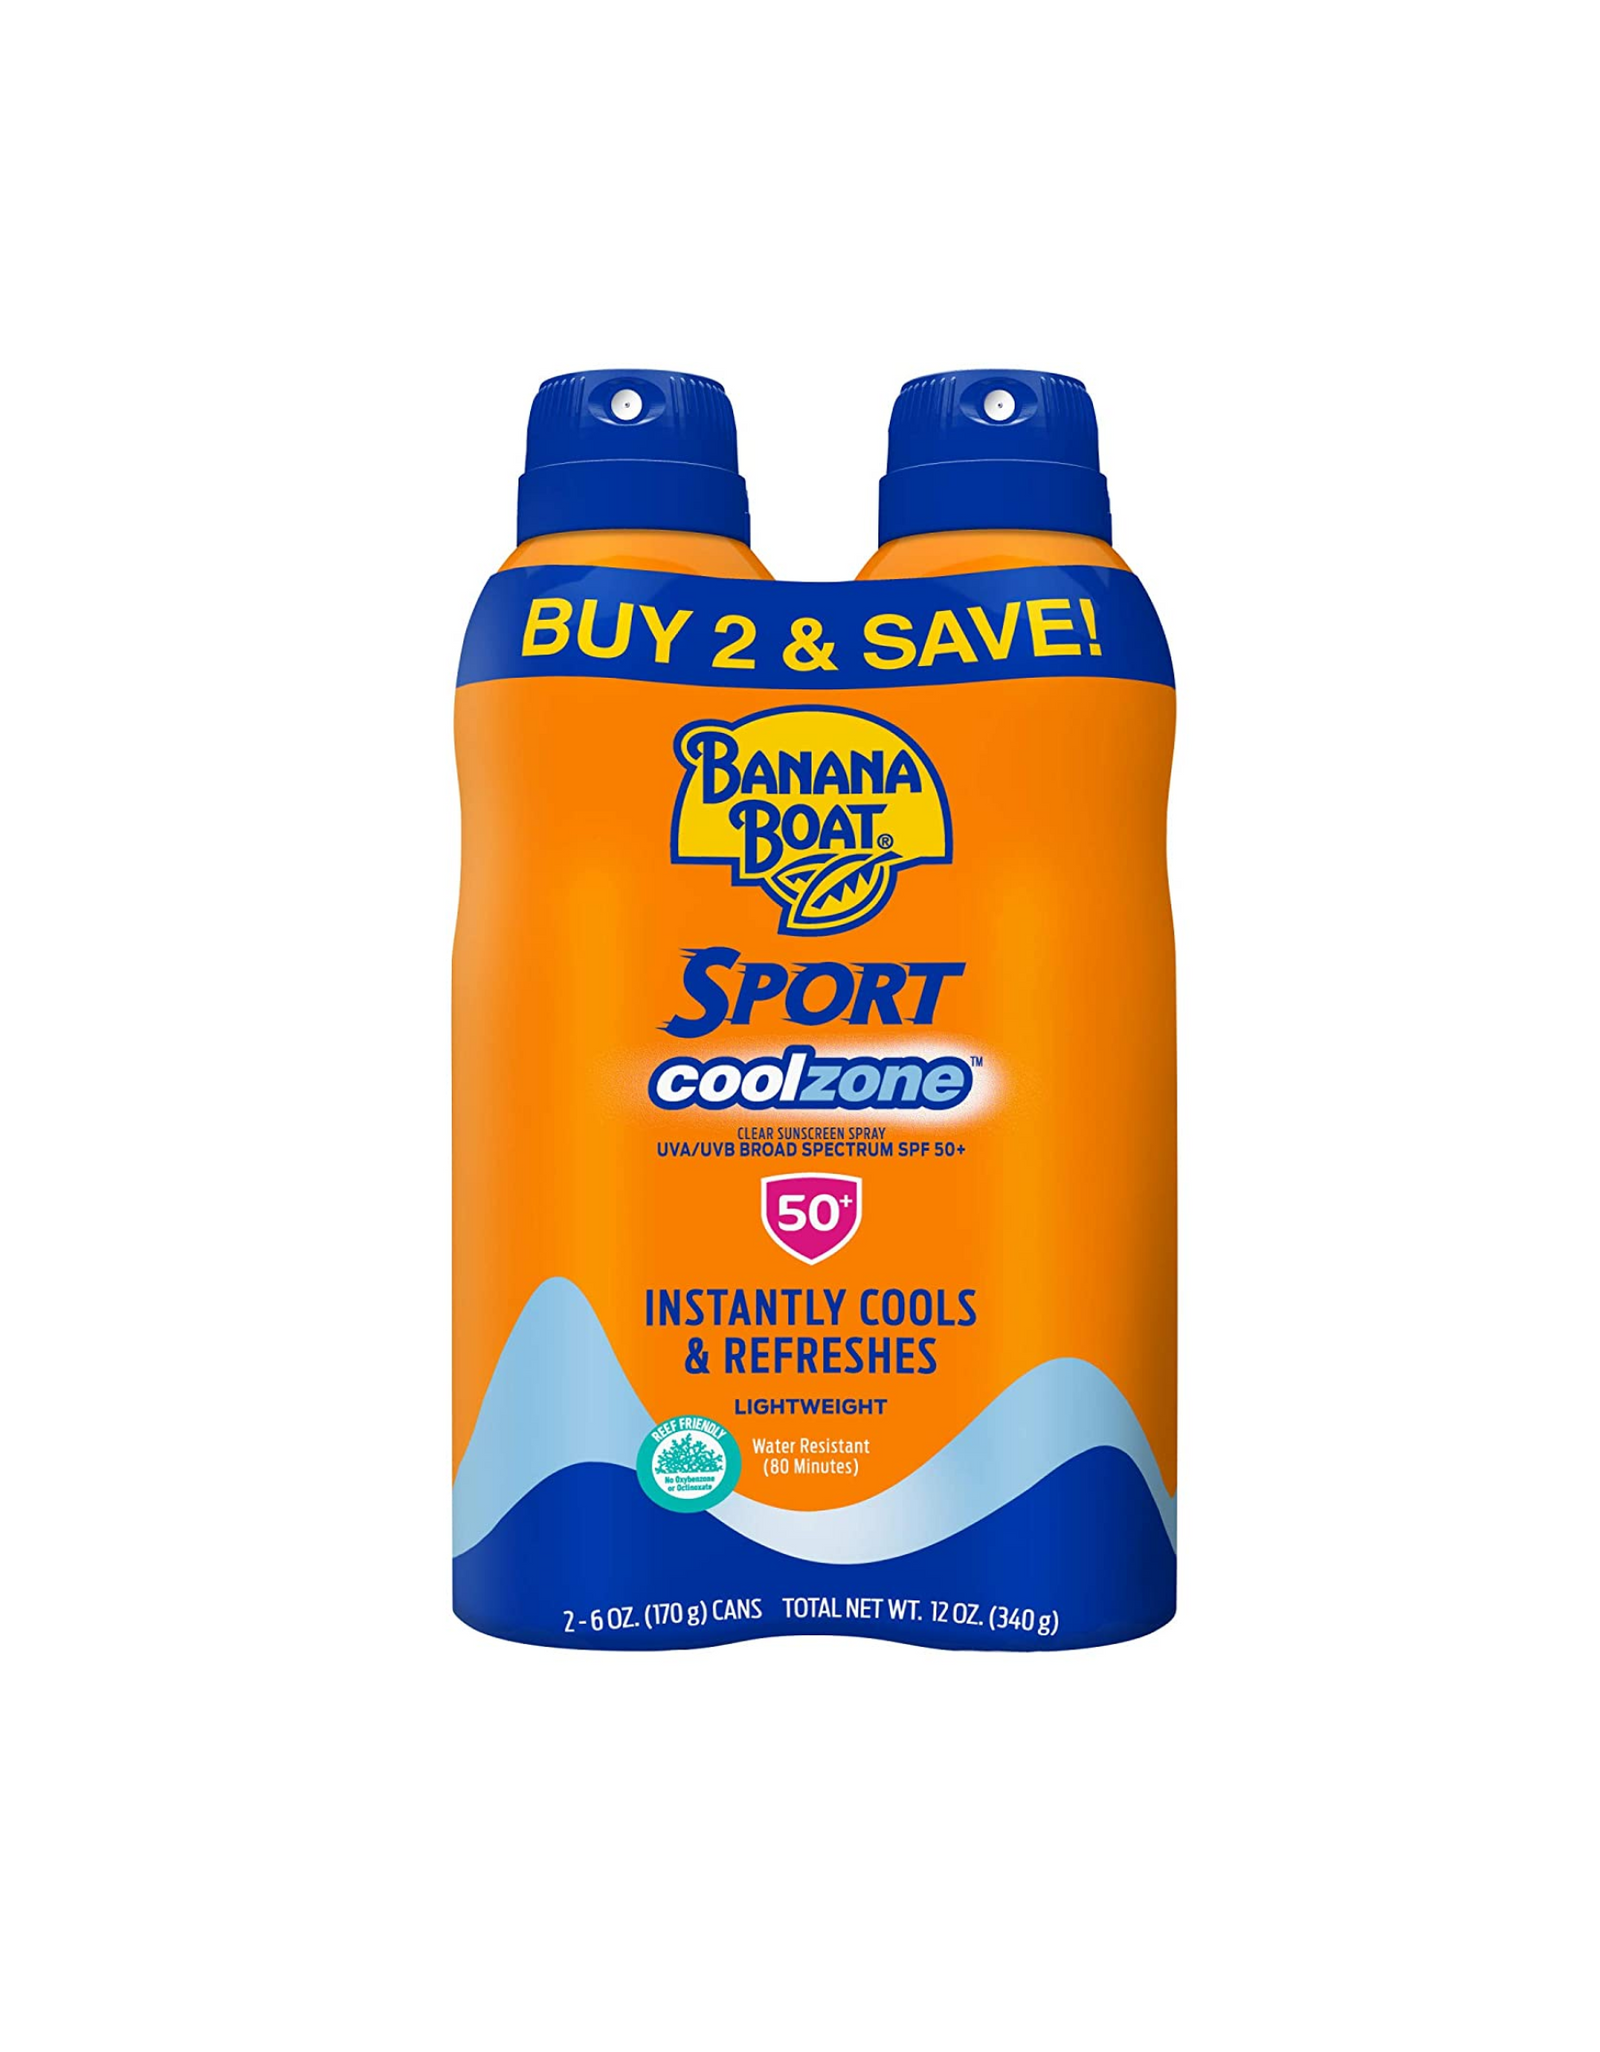 Banana Boat Sport Performance Cool Zone, Broad Spectrum SPF 50, 6 oz, Twin Pack